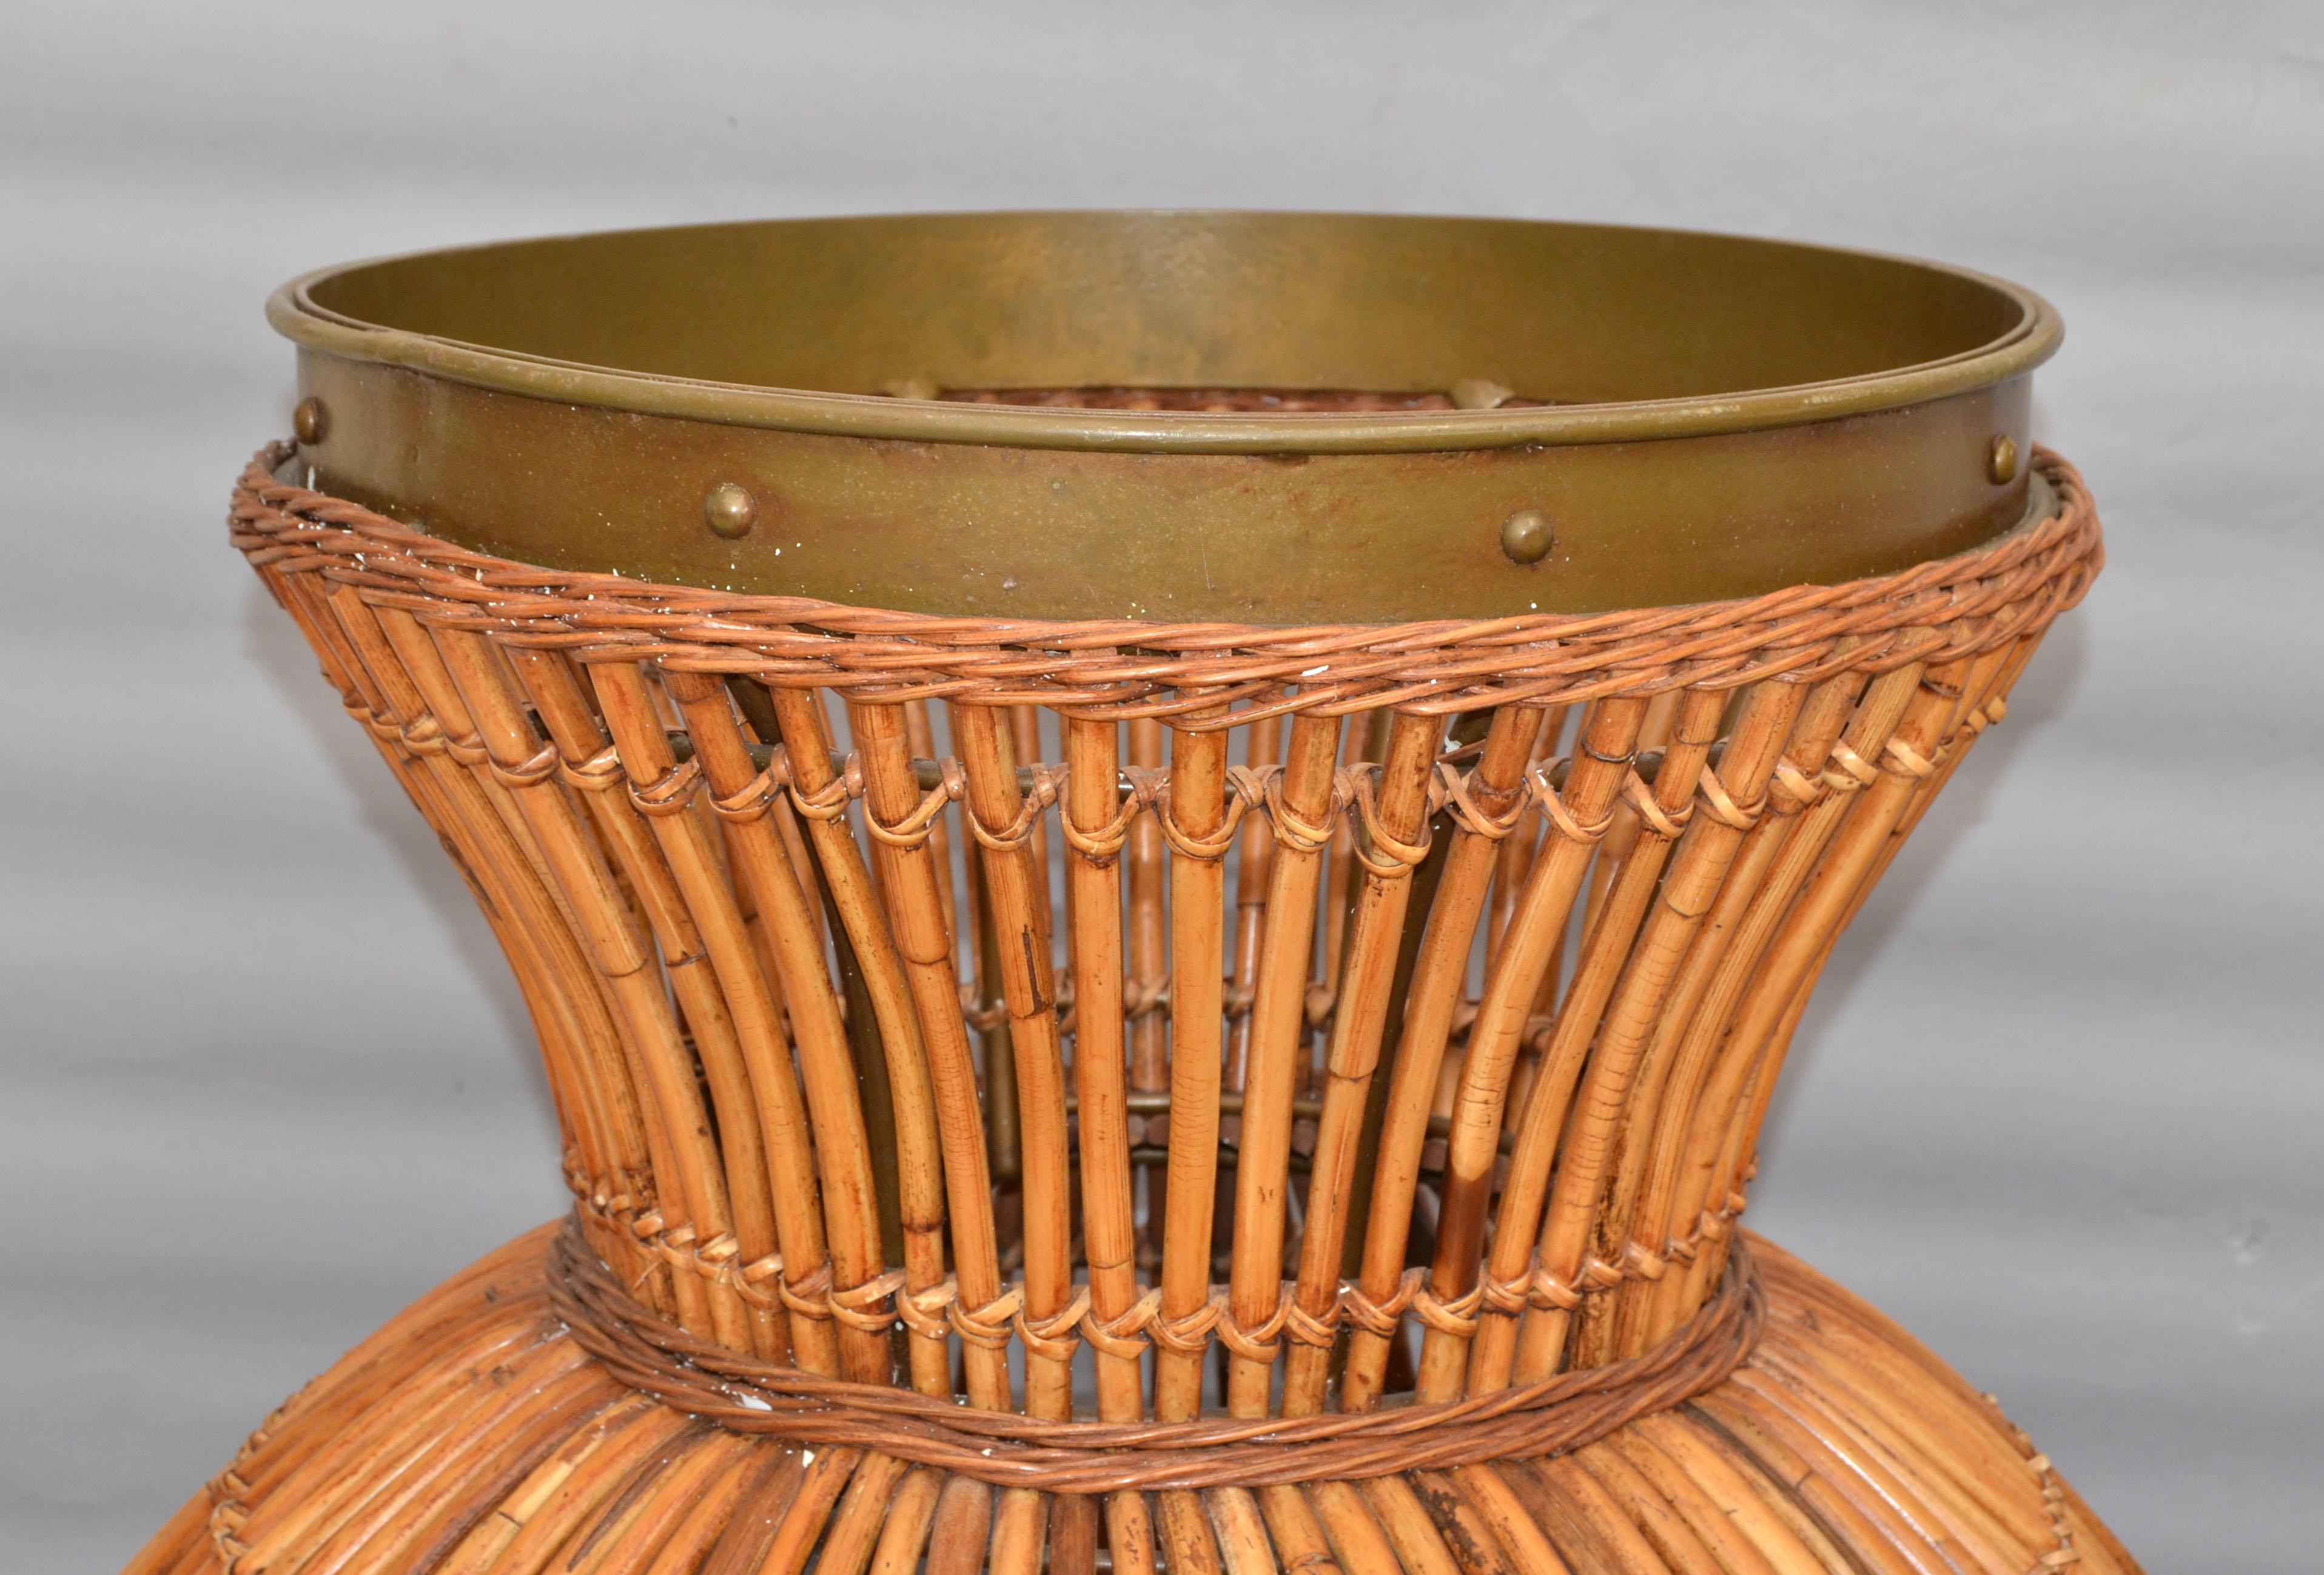 20th Century Monumental 6 Feet Mid-Century Modern Handcrafted Bamboo Brass & Cane Floor Vase For Sale